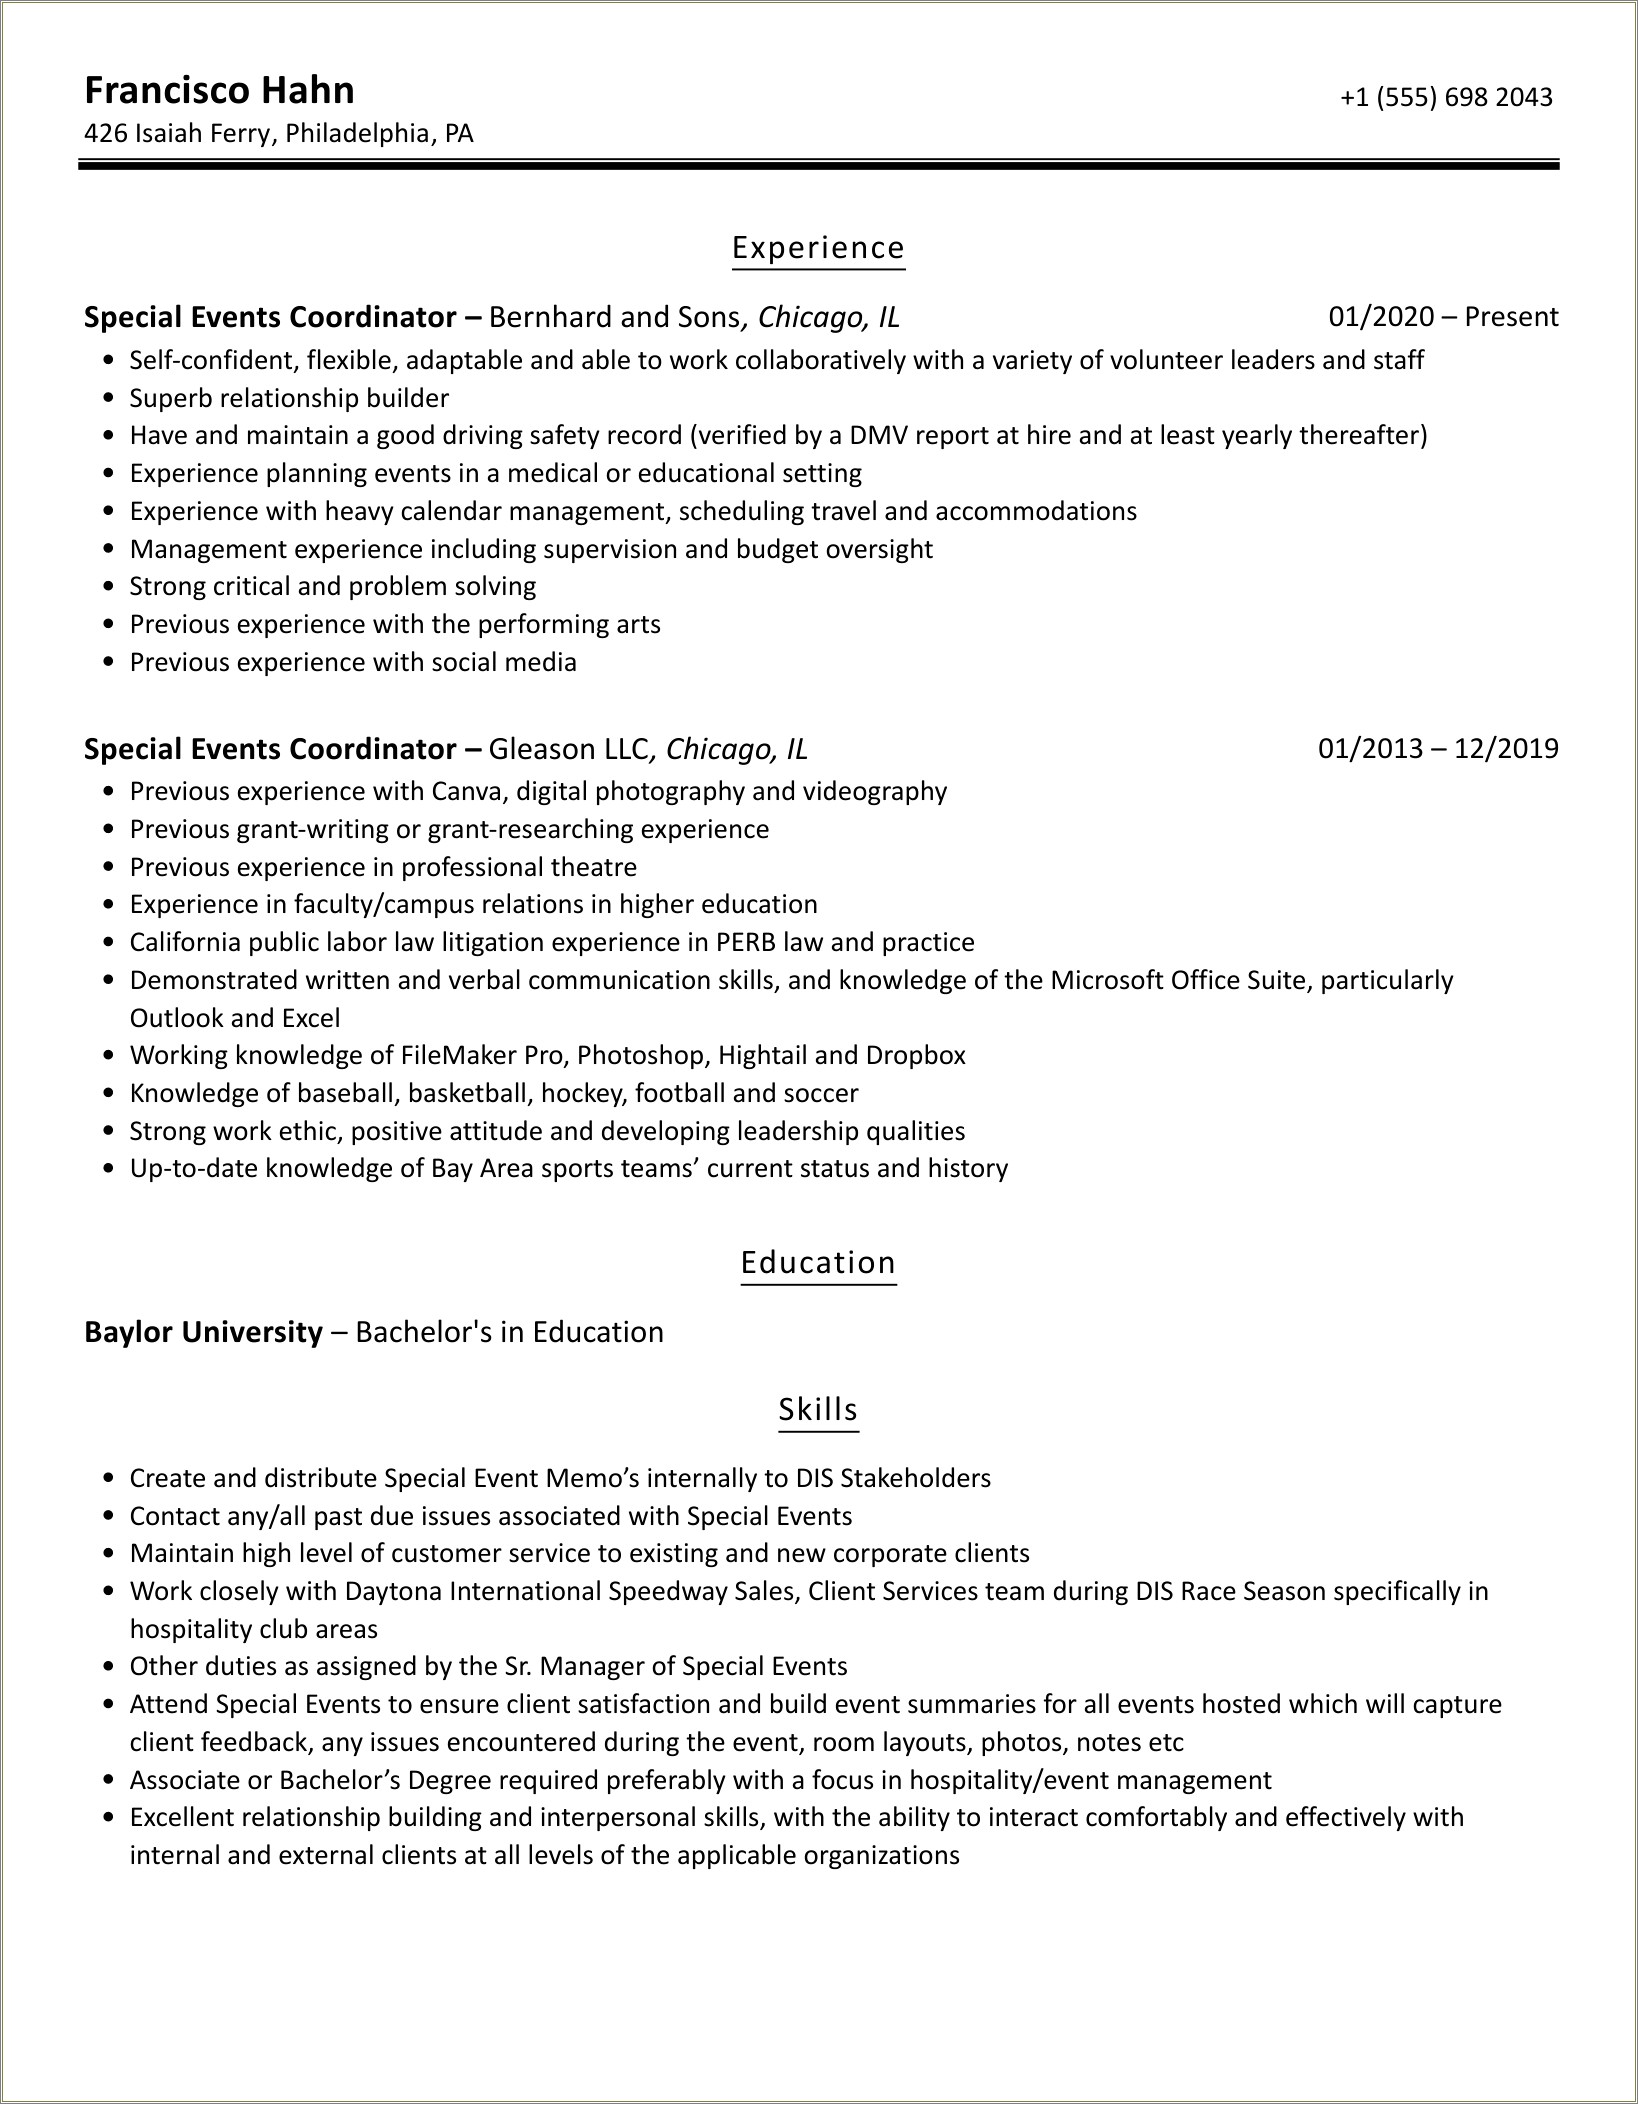 Resume Objective For Community Special Events Coordinator